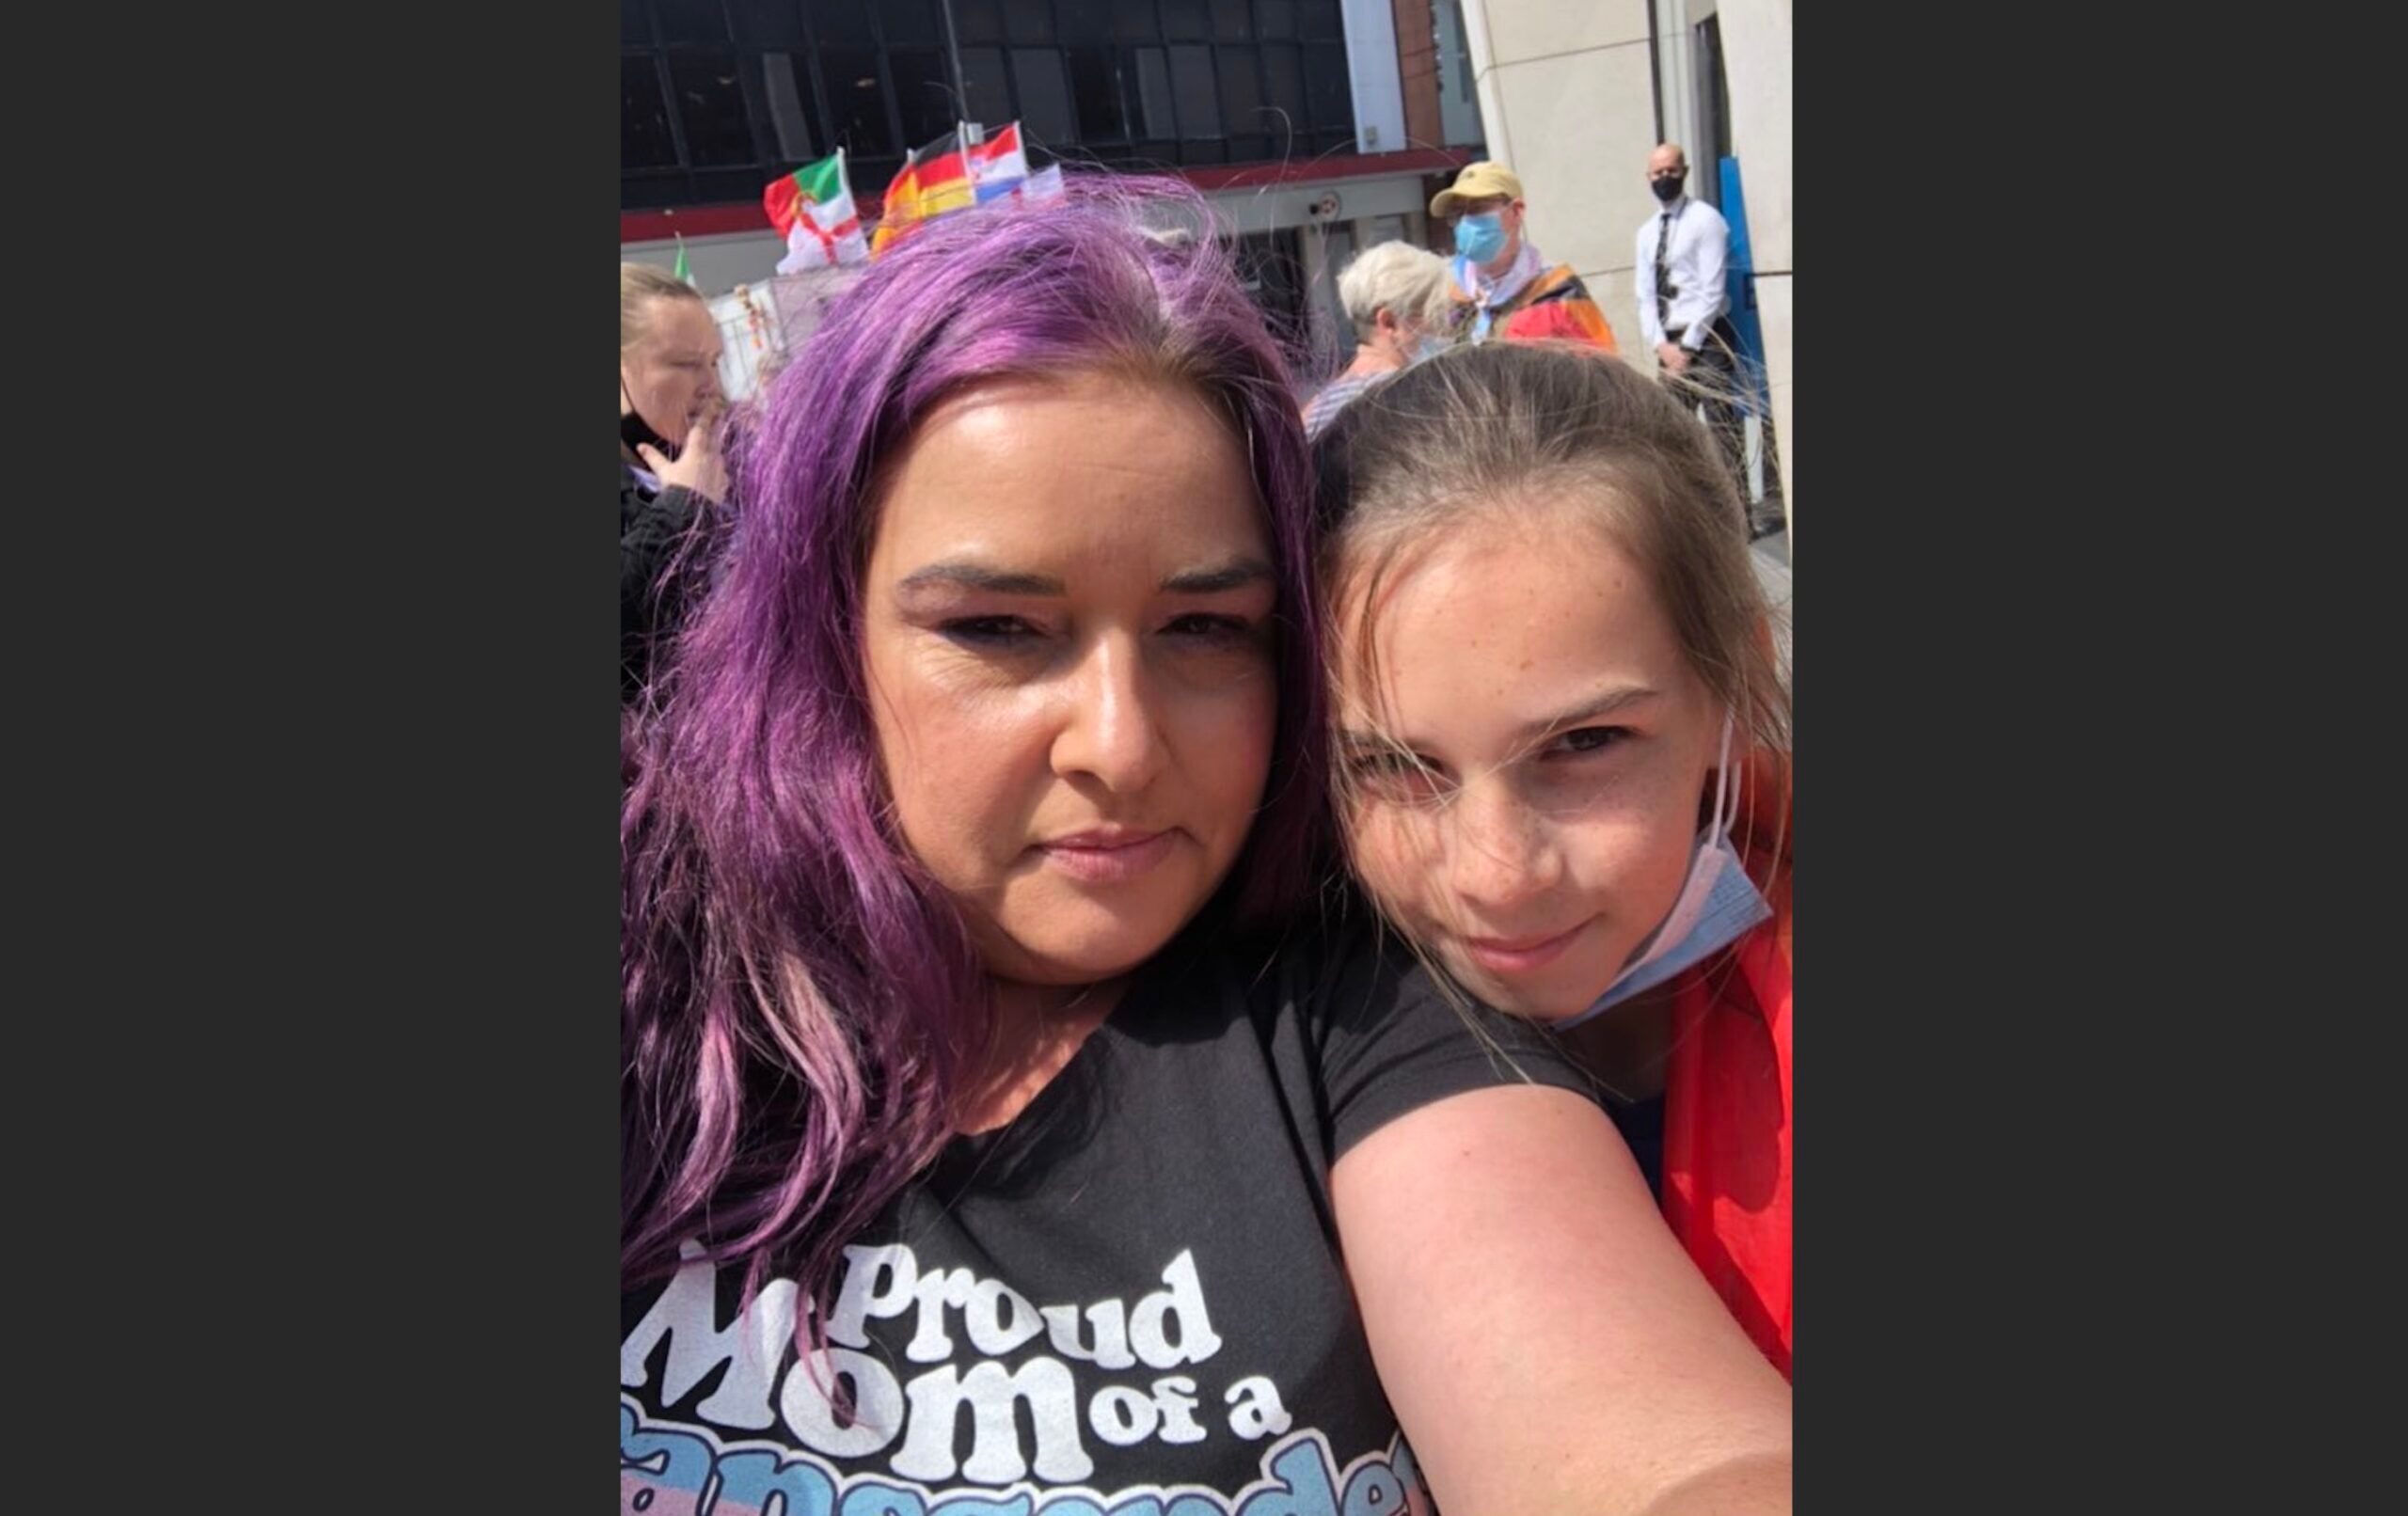 Meet the parents being absolutely awesome allies to their LGBTQ kids